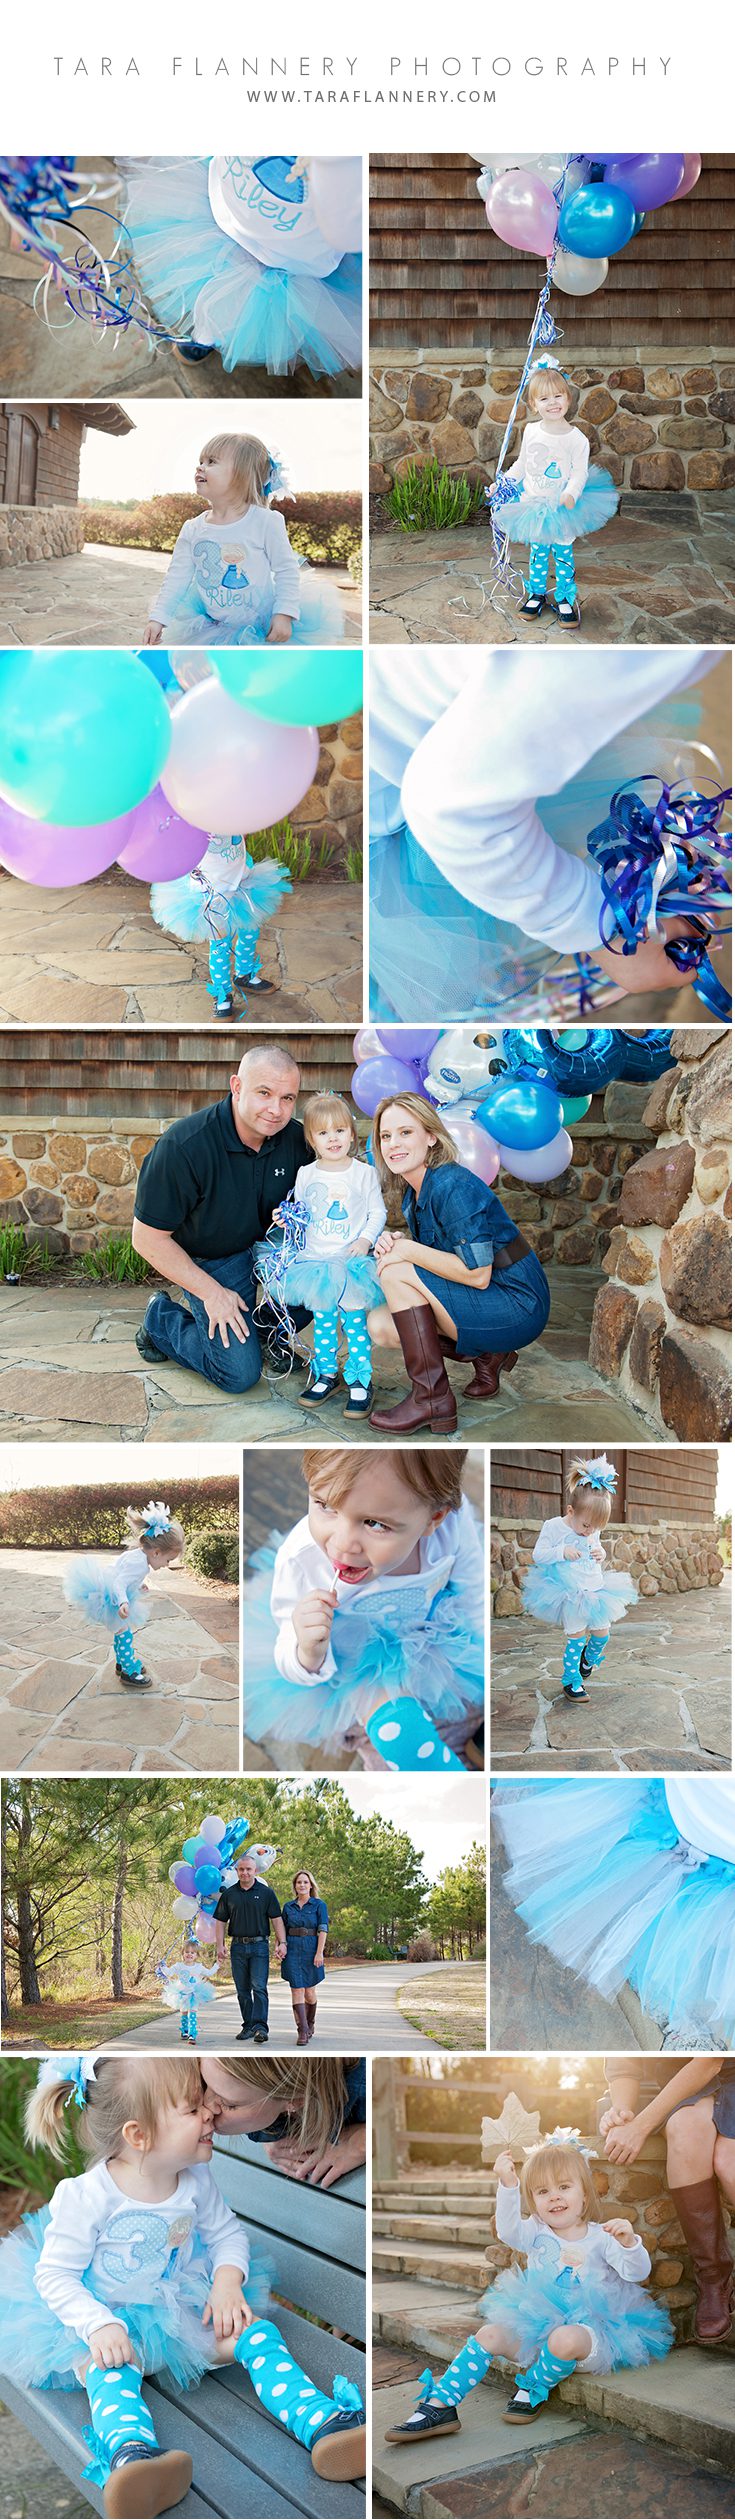 Celebrating her 3rd birthday with a Frozen theme!